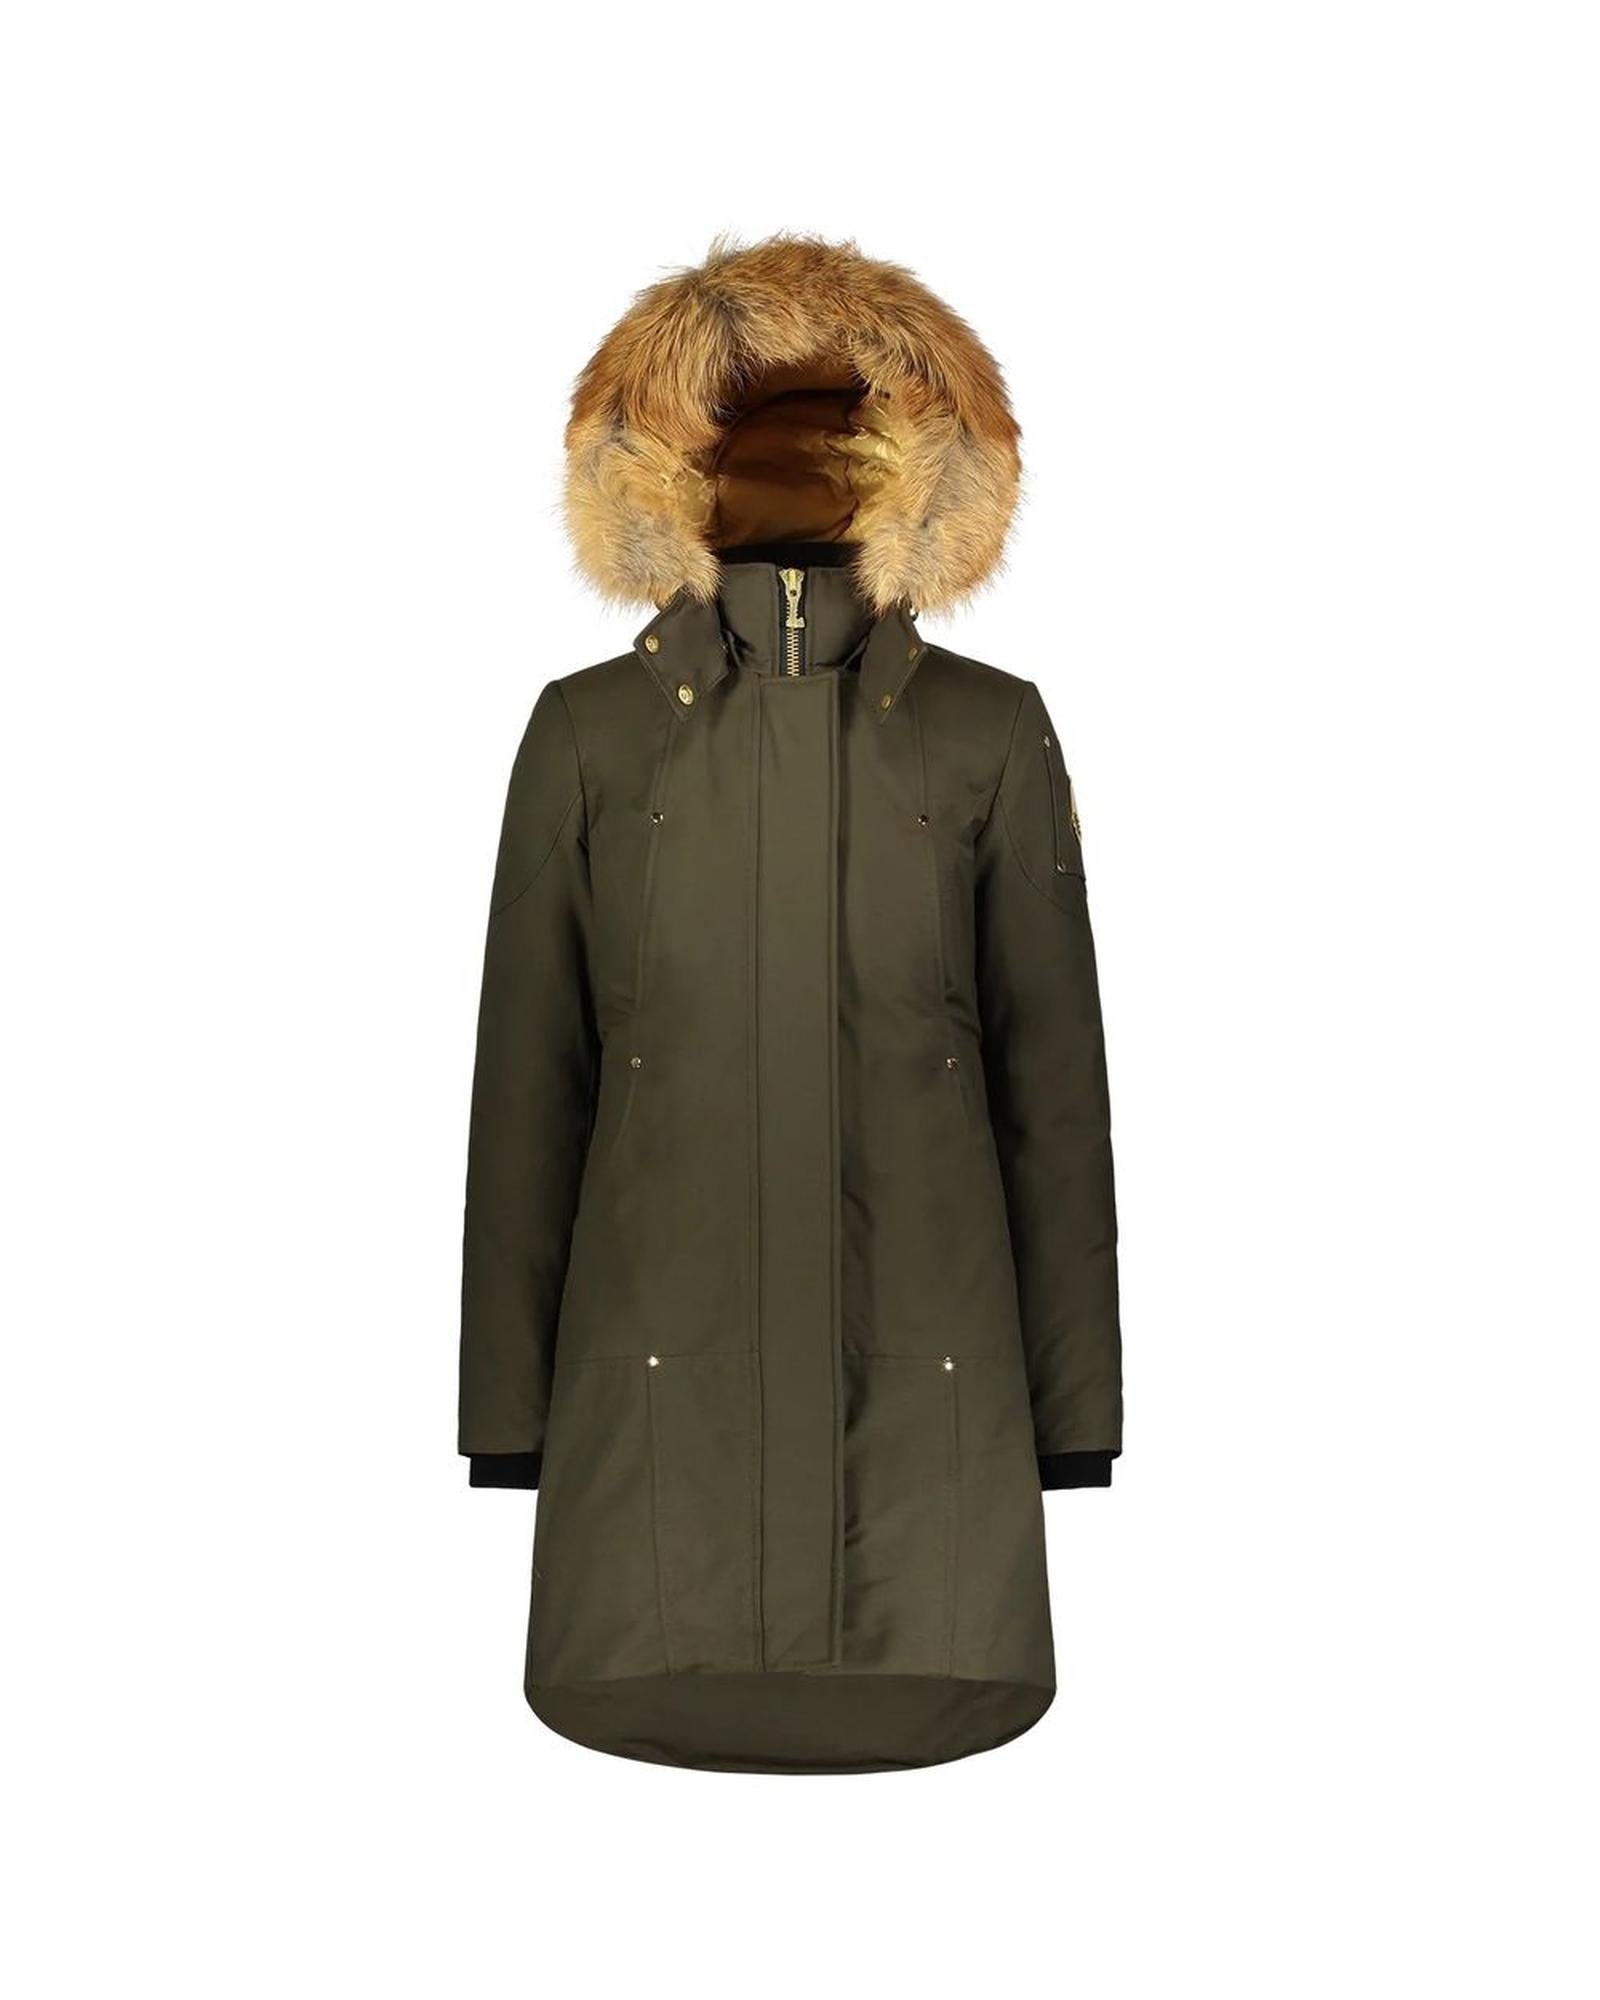 Moose Knuckles Women's Army Cotton Jackets & Coat - S